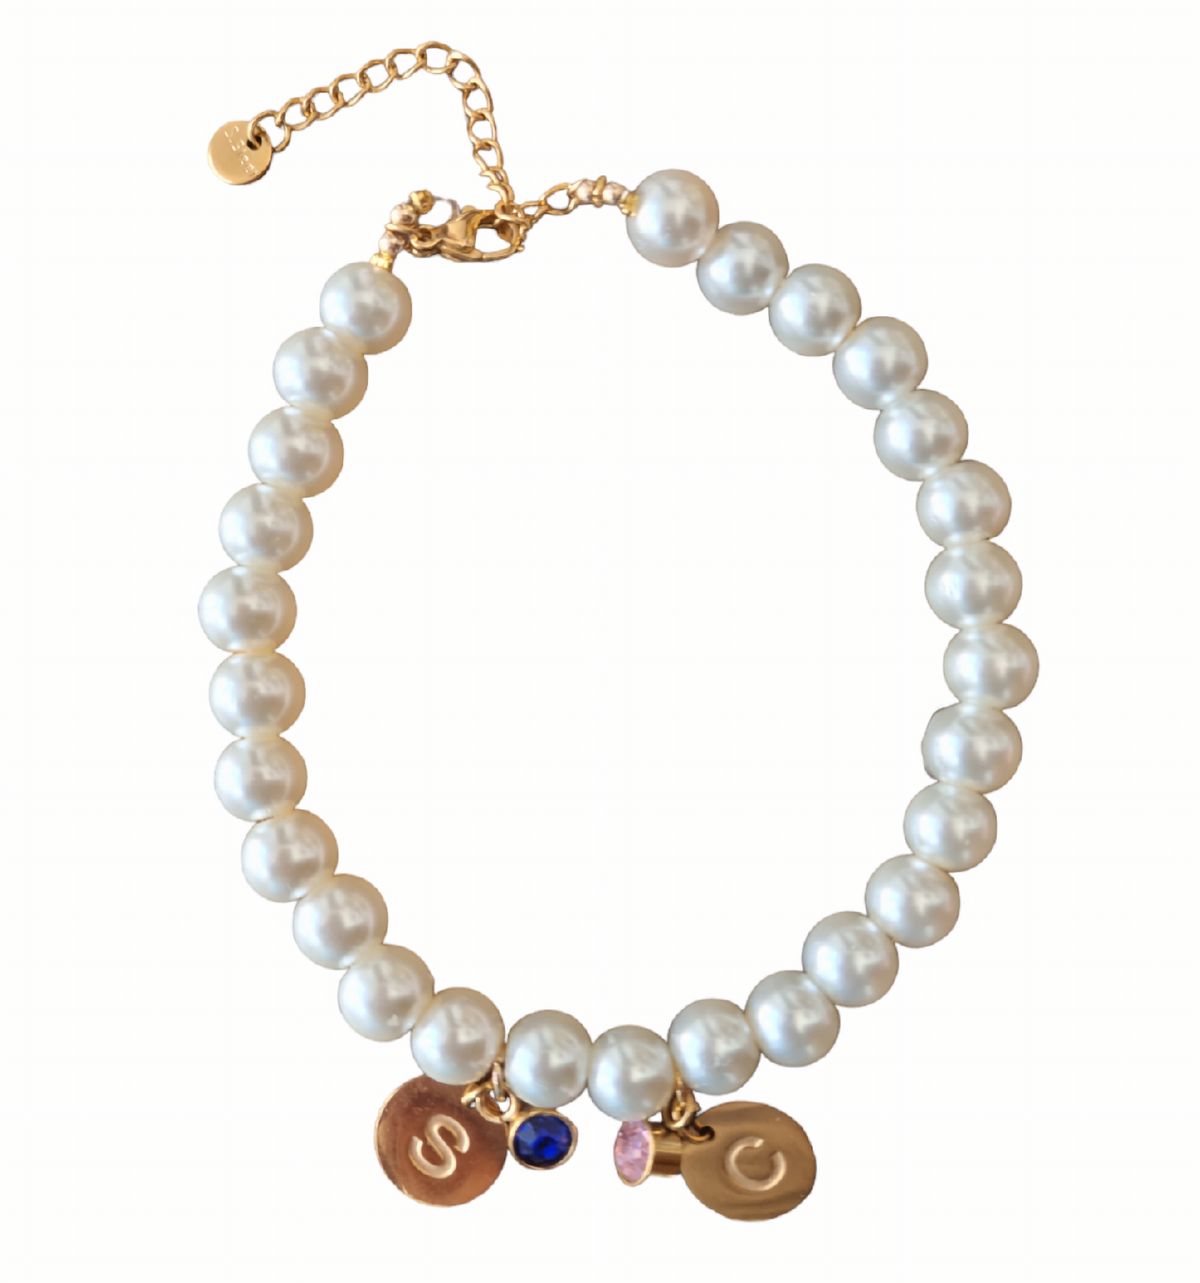 Initial and Birthstone Bracelet